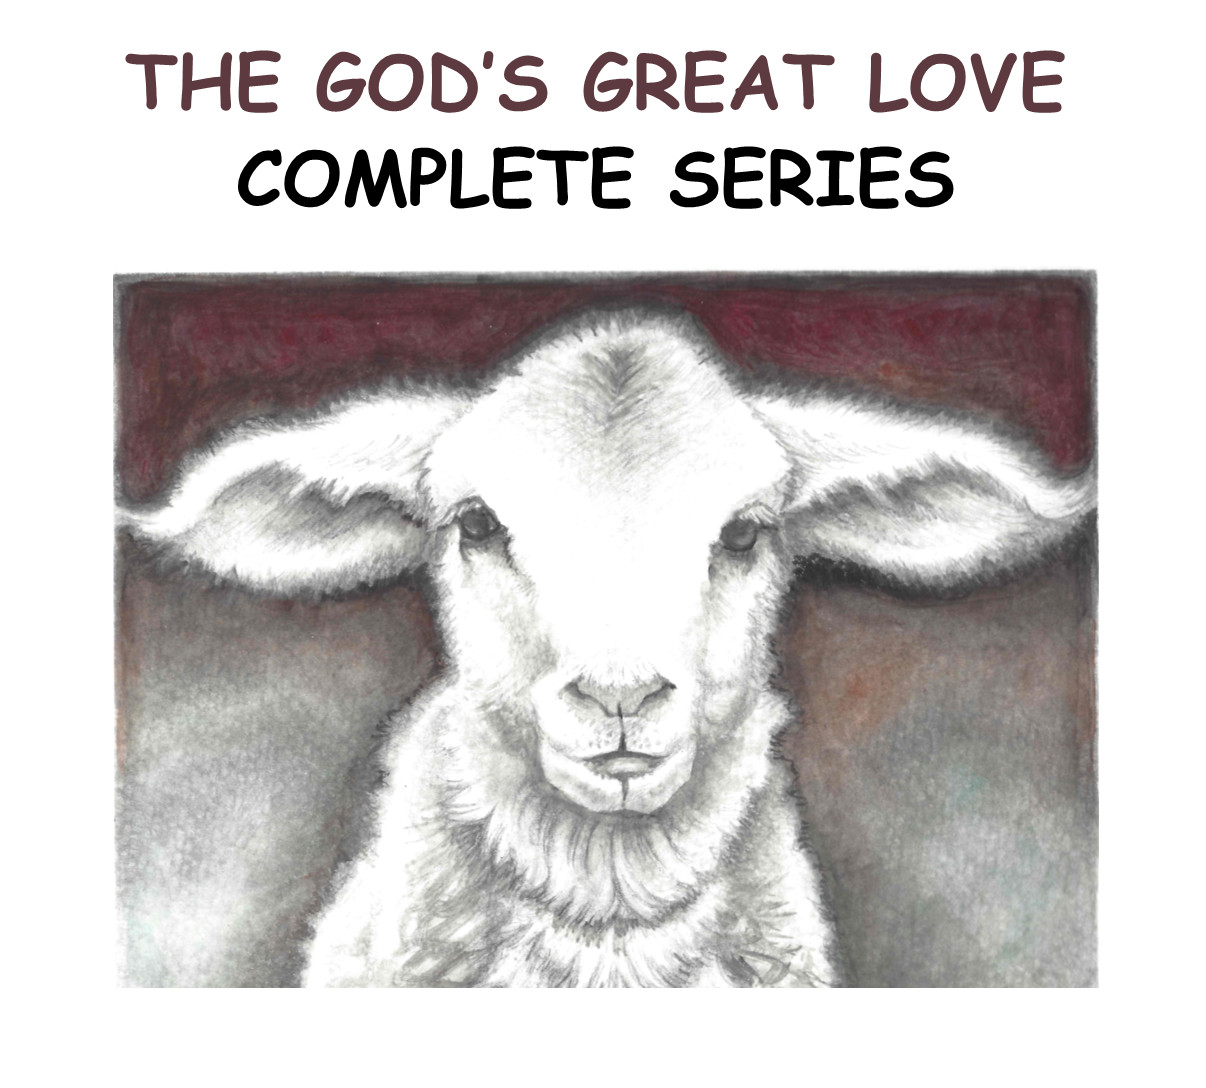 God's Great Love Complete Series of 9 books